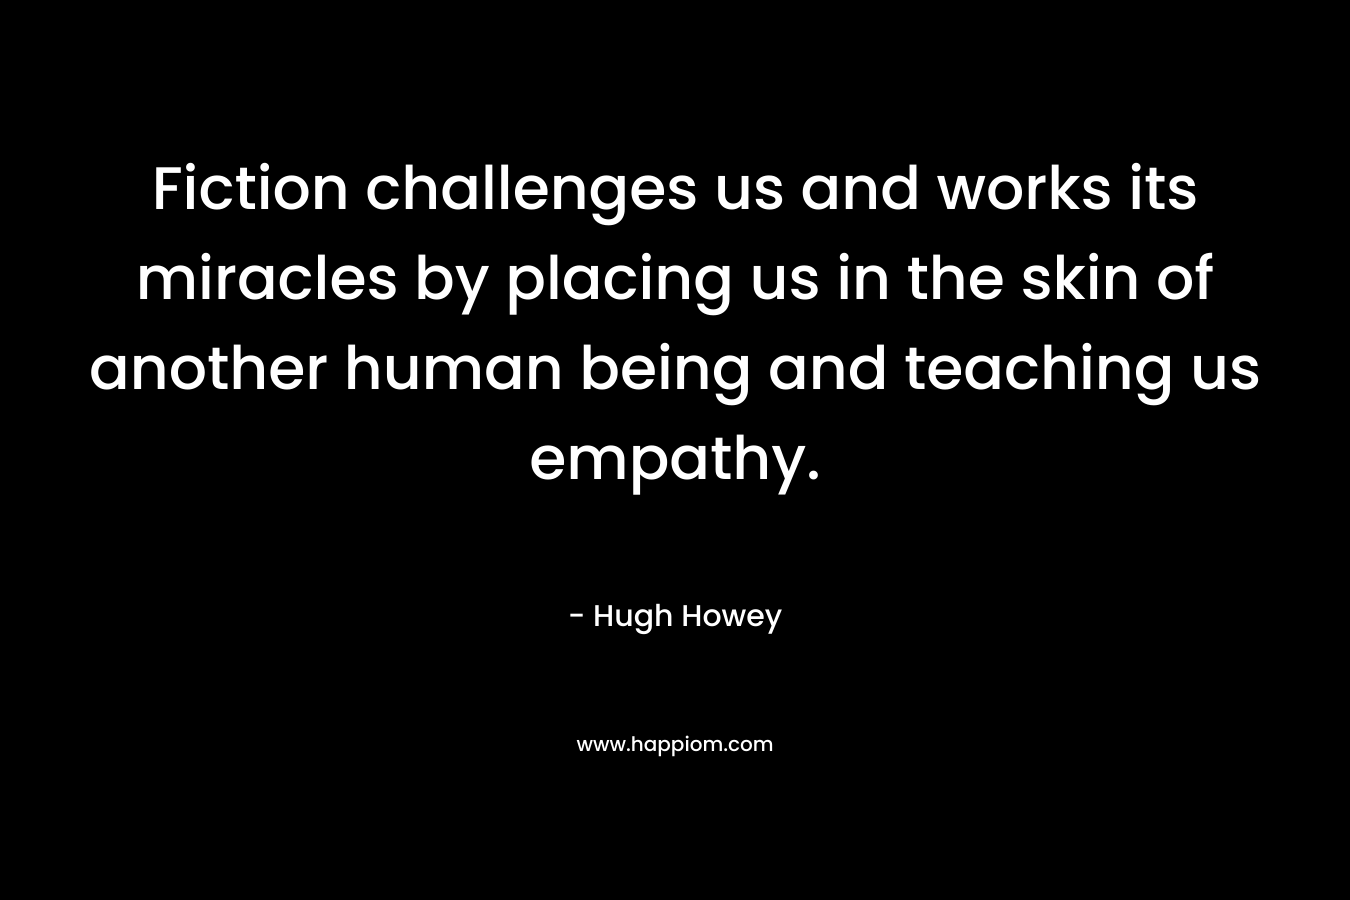 Fiction challenges us and works its miracles by placing us in the skin of another human being and teaching us empathy.